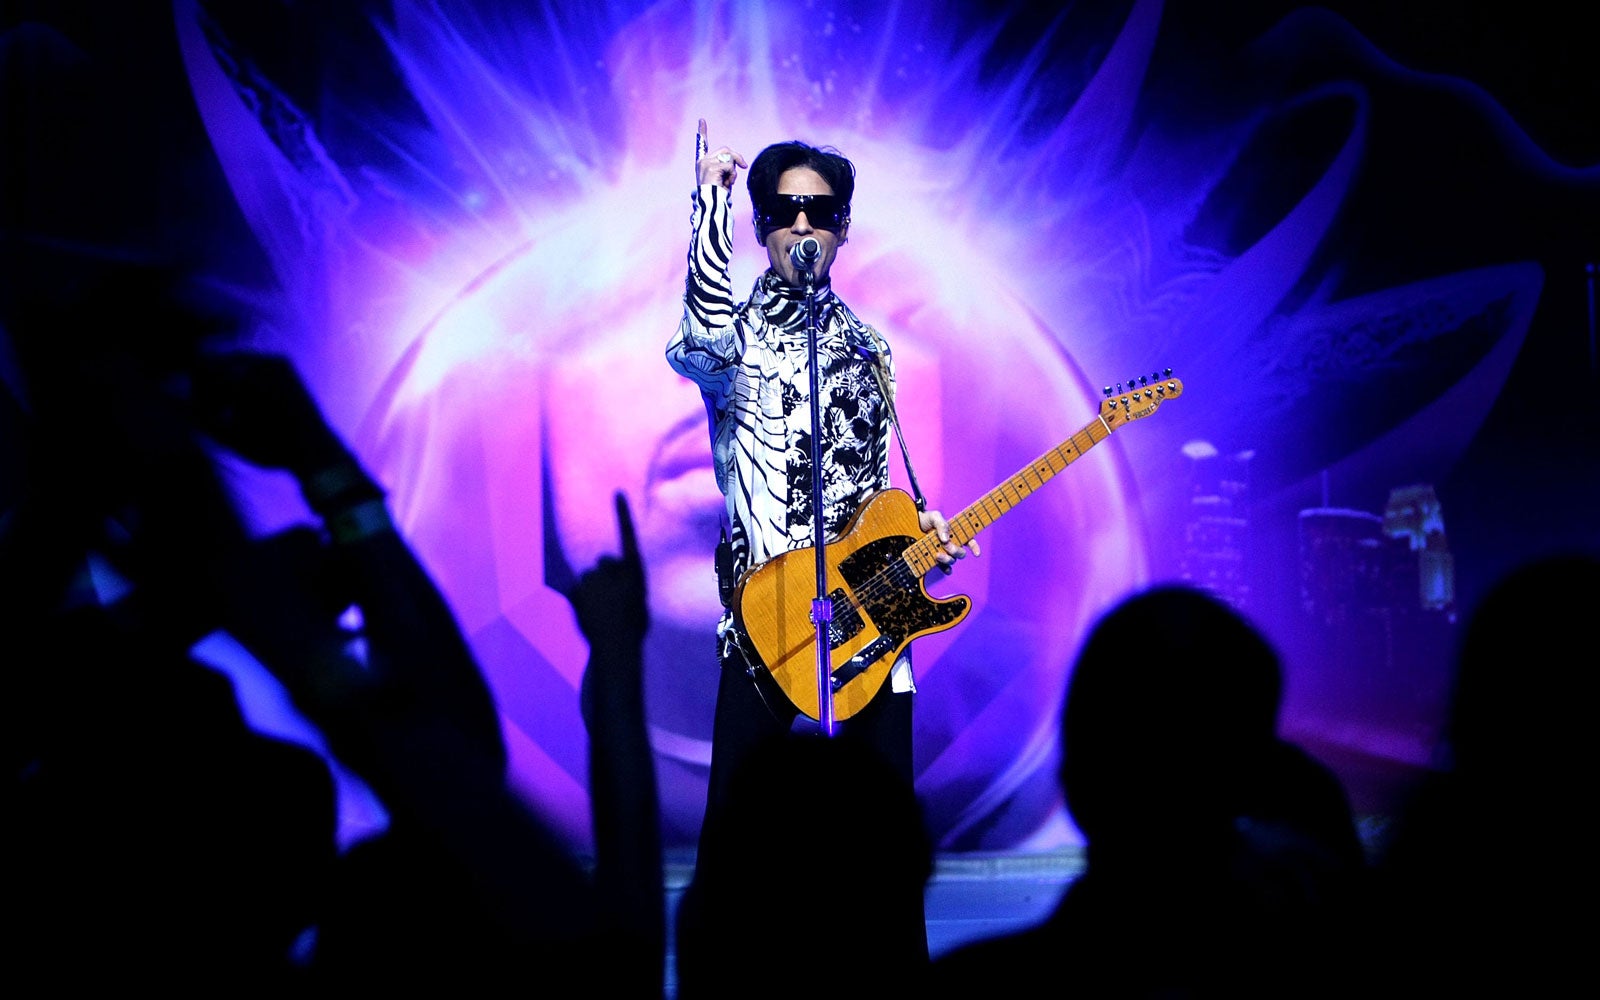 The World’s First Prince Exhibition Is Opening This Fall
